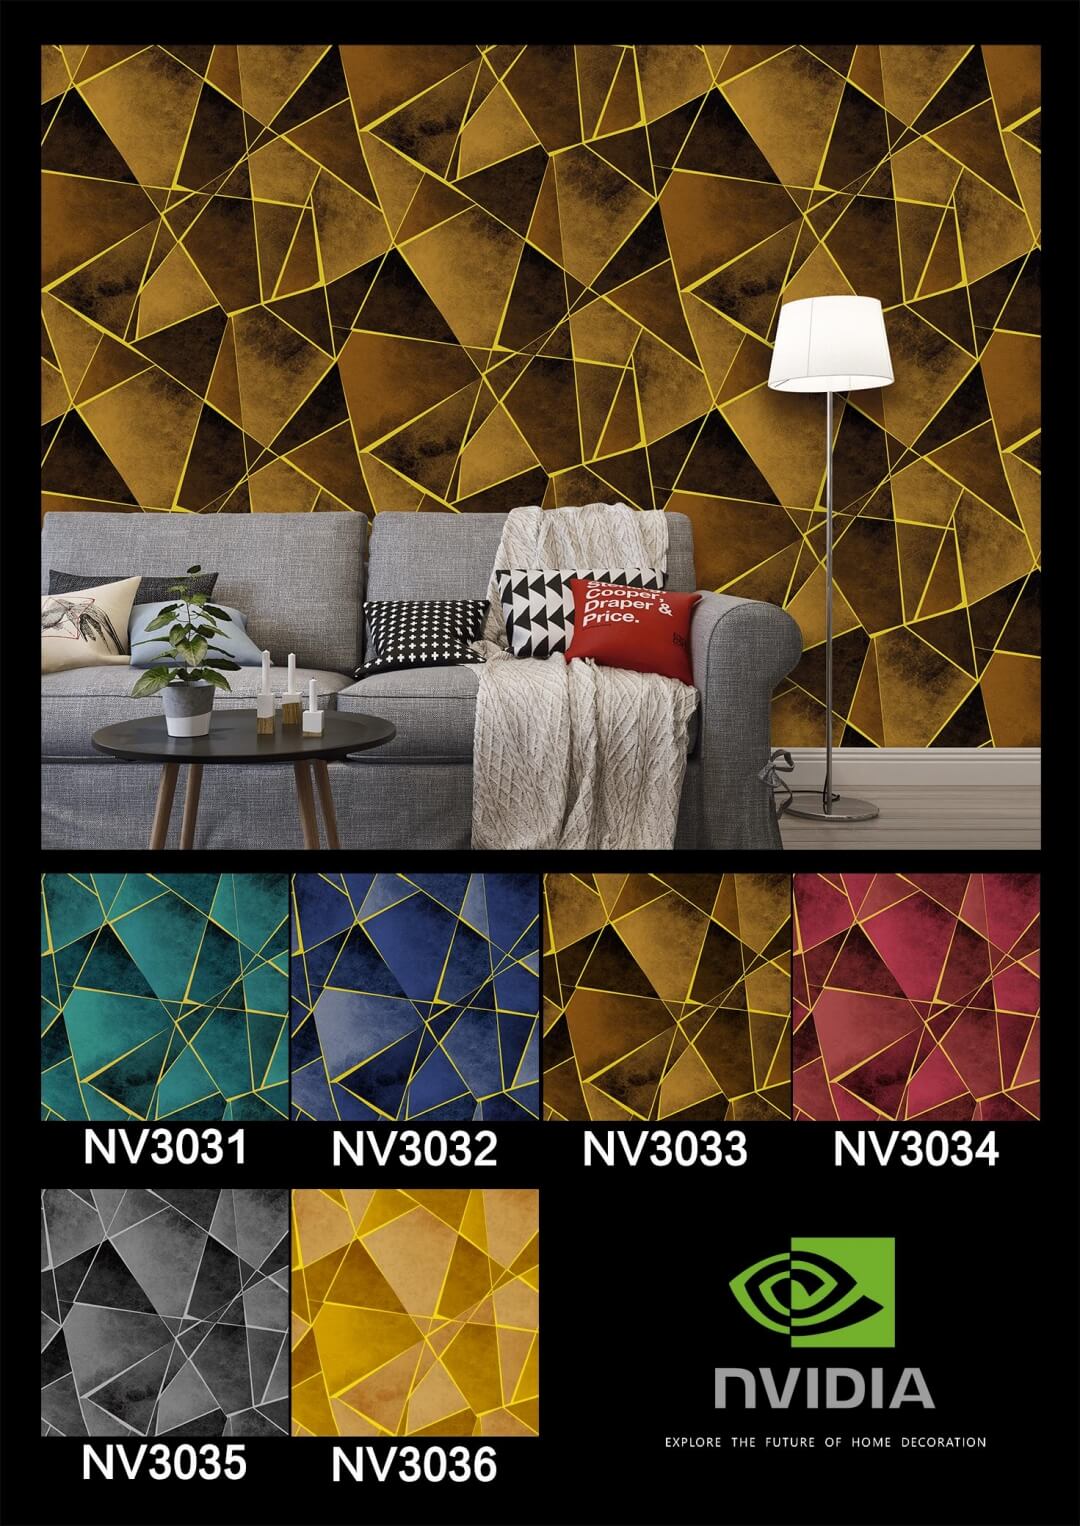 3D Waterproof Home Wallpaper at Lowest Price (11)